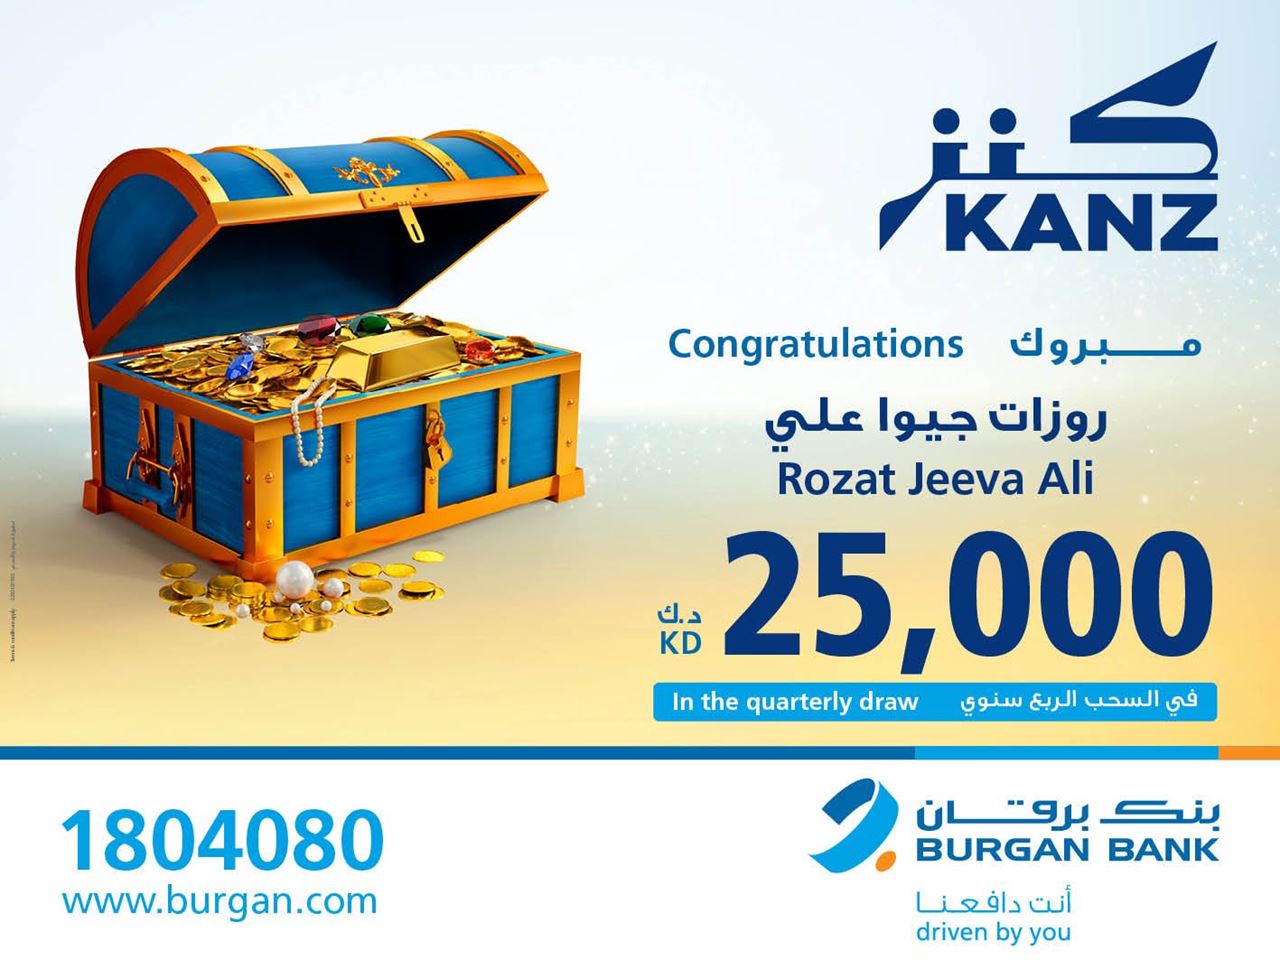 Burgan Bank Announces the Name of the Quarterly Draw Winner of Kanz Account